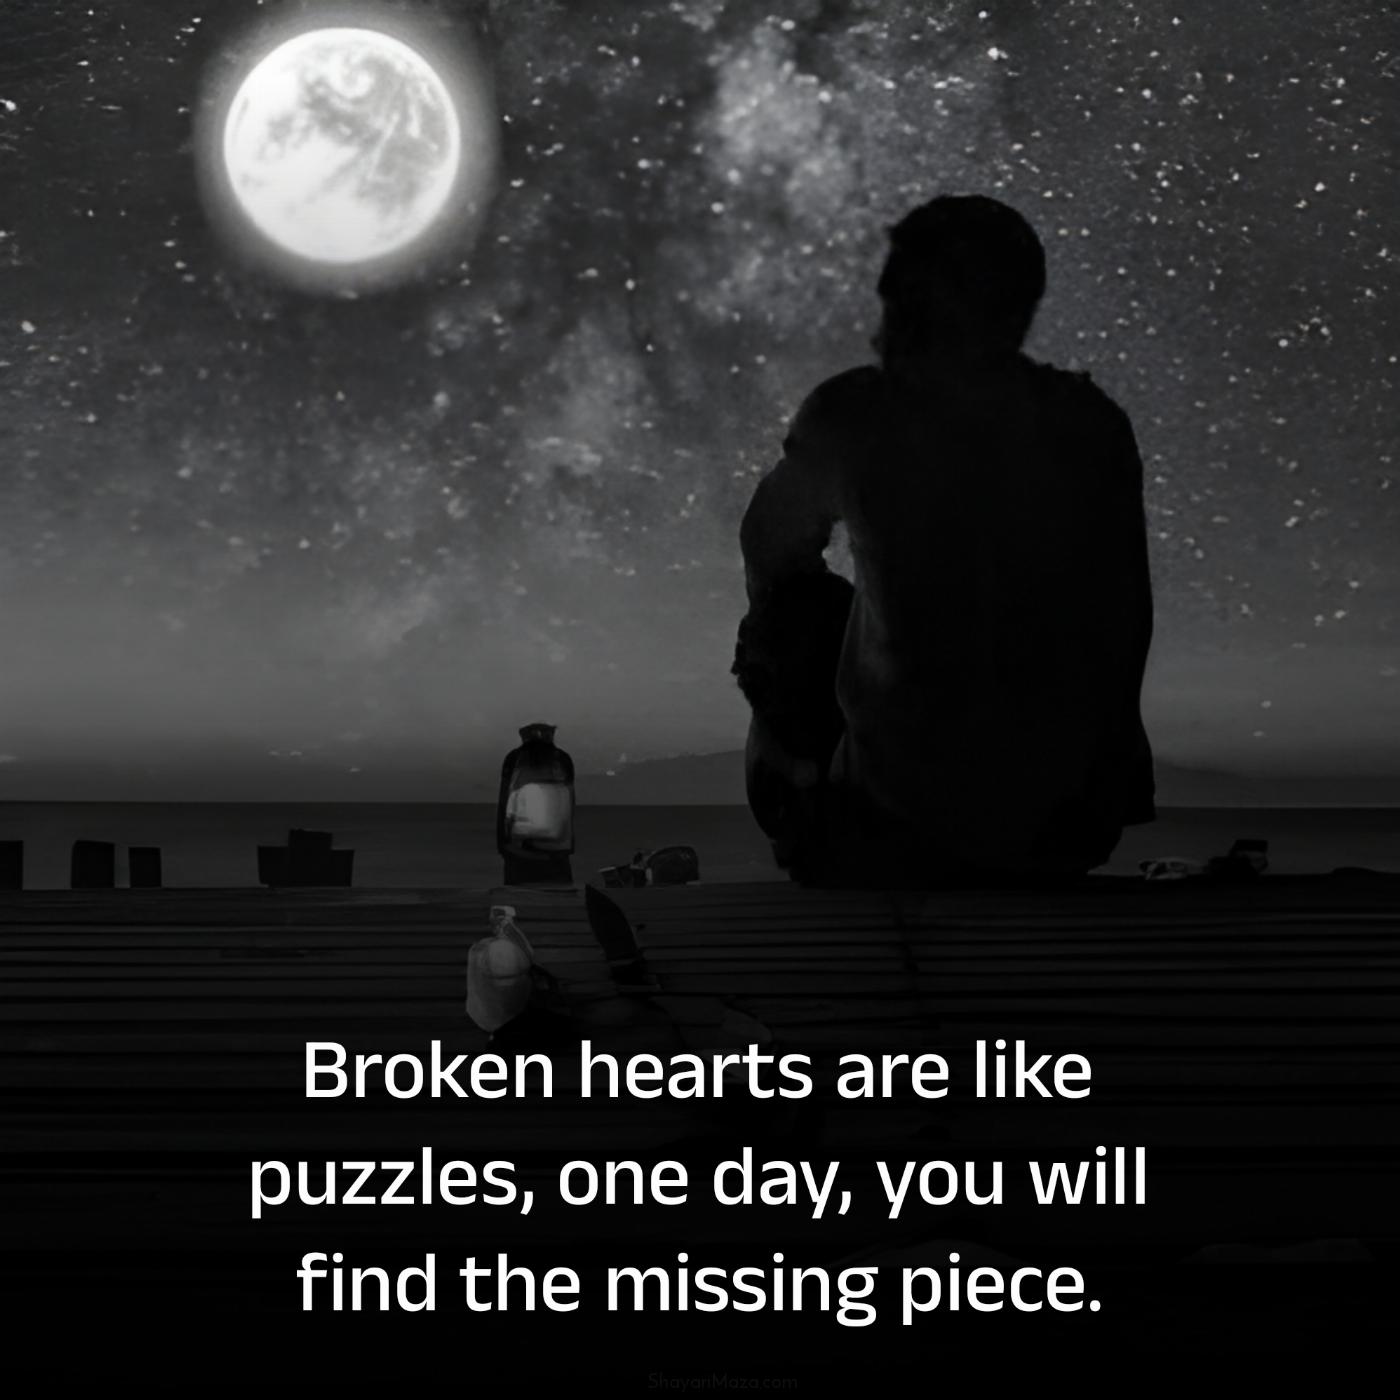 Broken hearts are like puzzles one day you will find